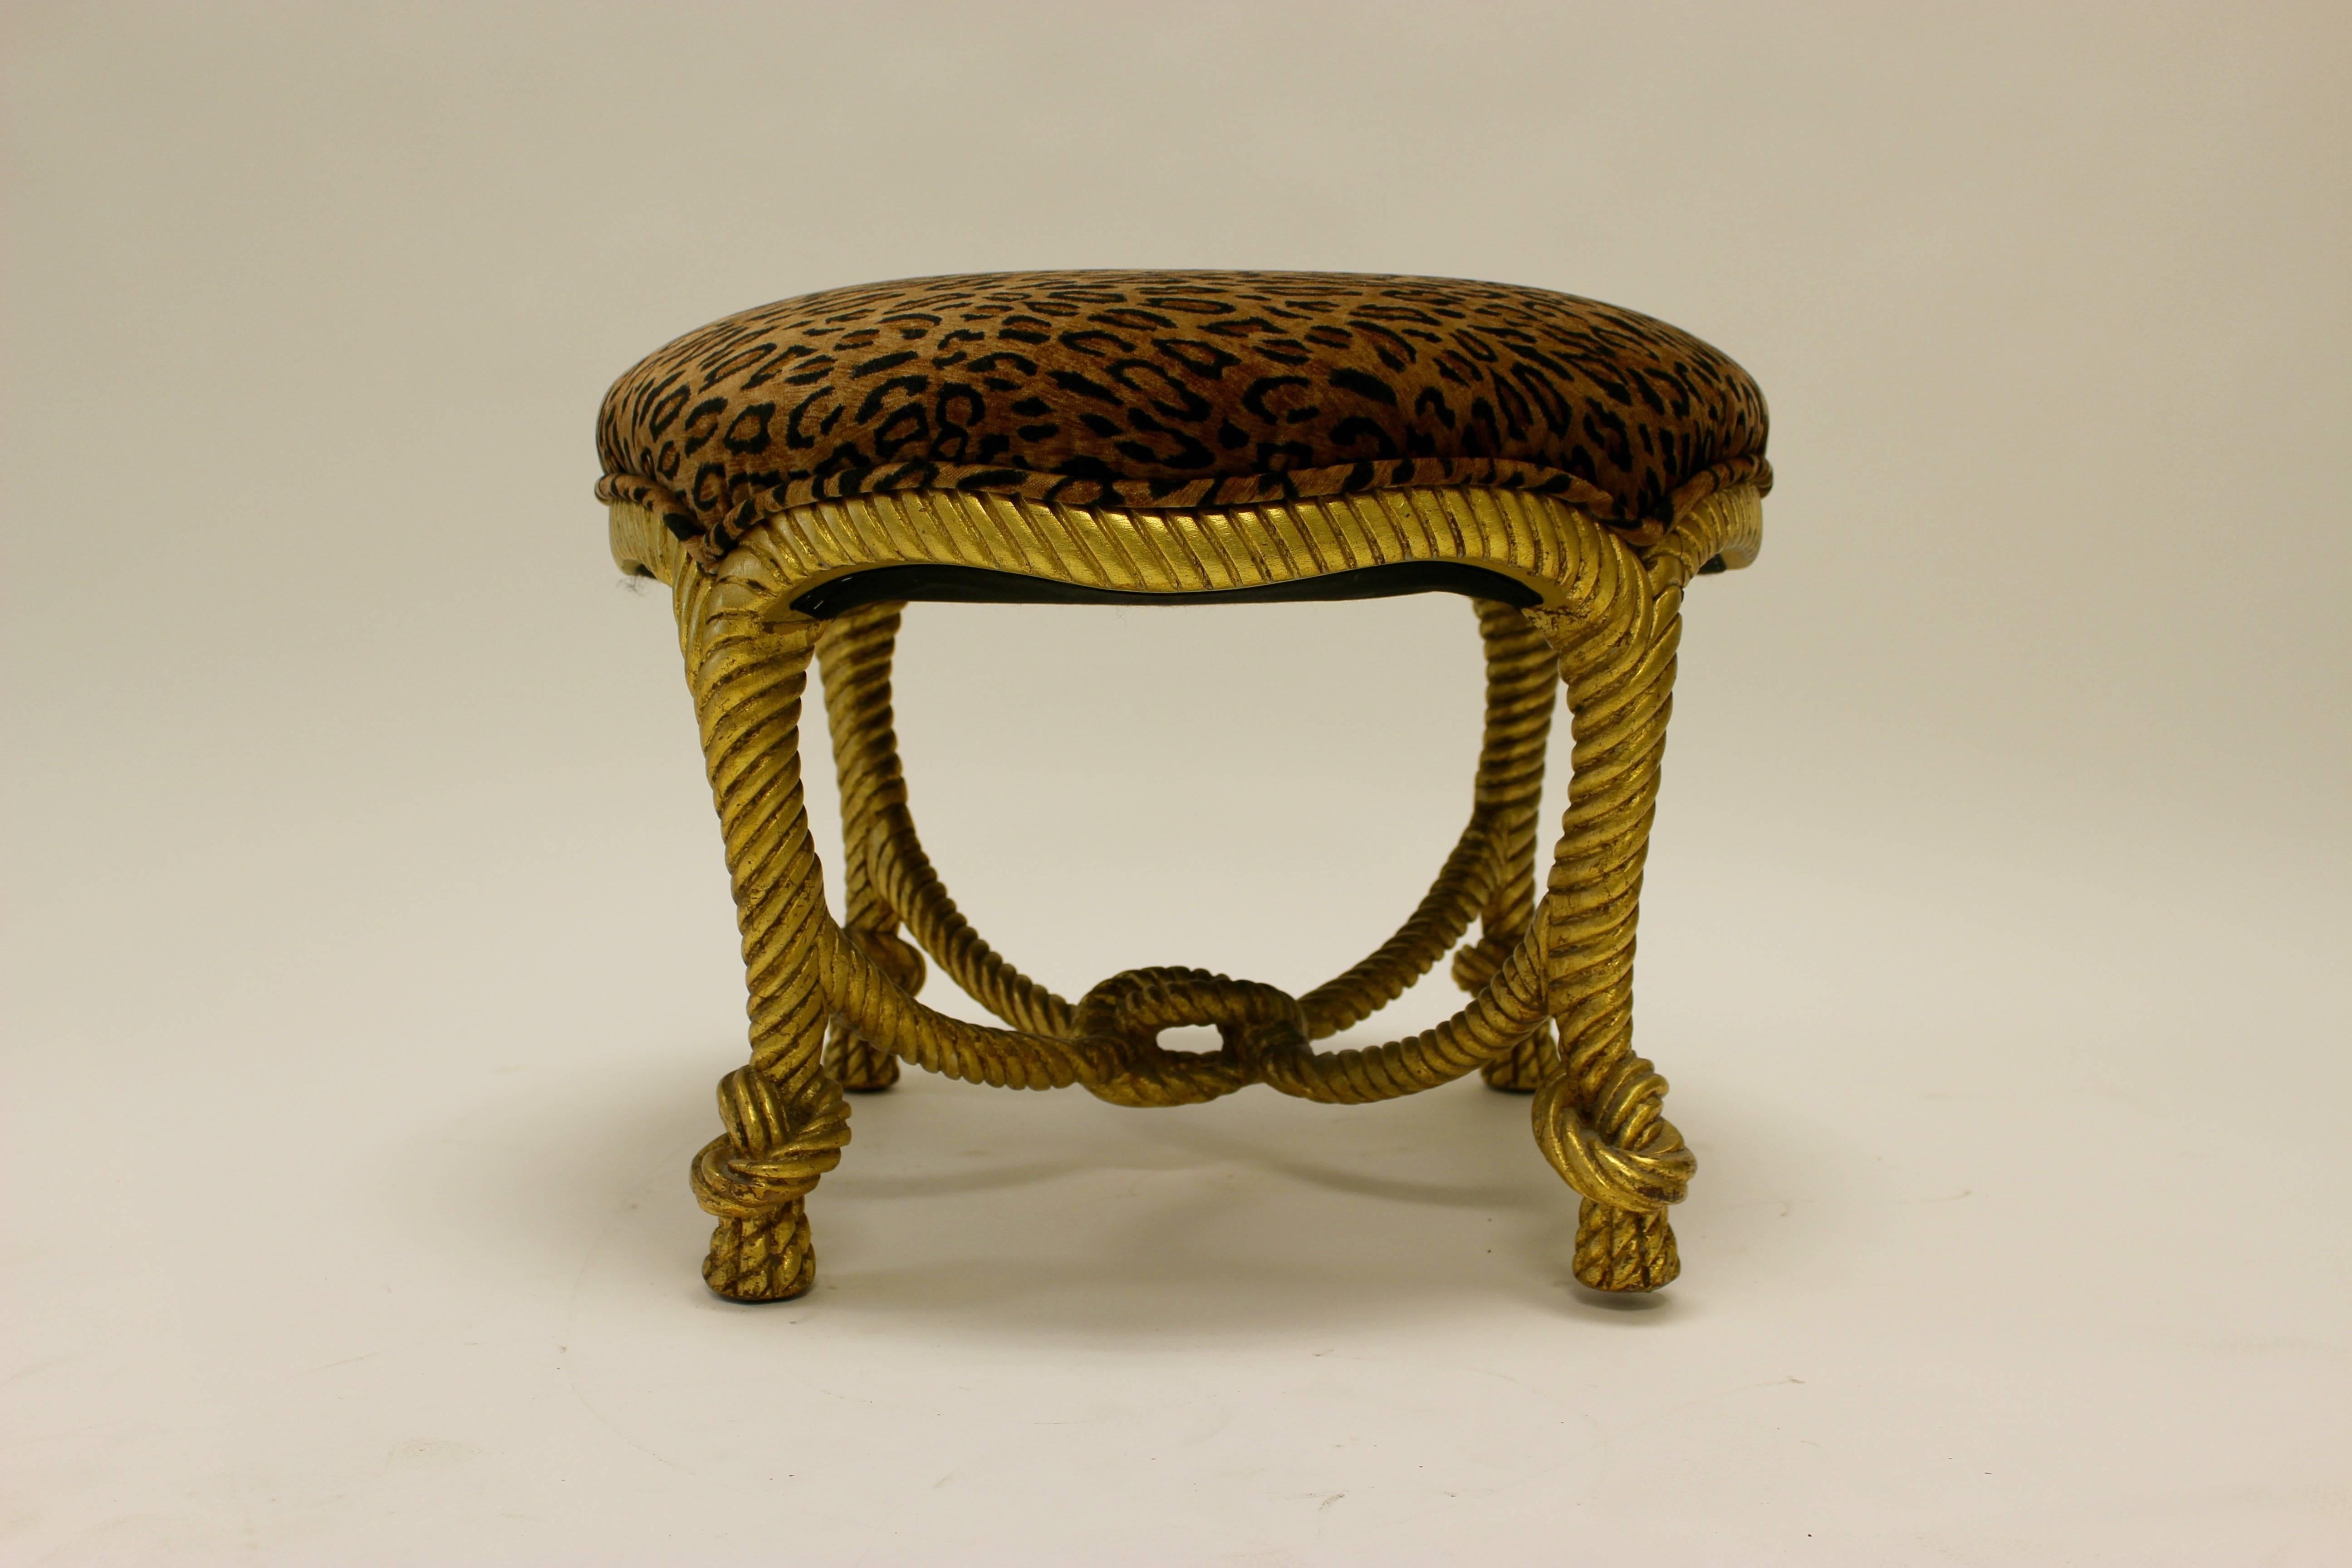 A French decorative Napoleon III style giltwood rope stool in the manner of A.M.E Fournier, with a circular seat upholstered in a modern jaguar velvet fabric. Resting on four carved twisted rope-like legs ending in tassel feet, the stool presents a